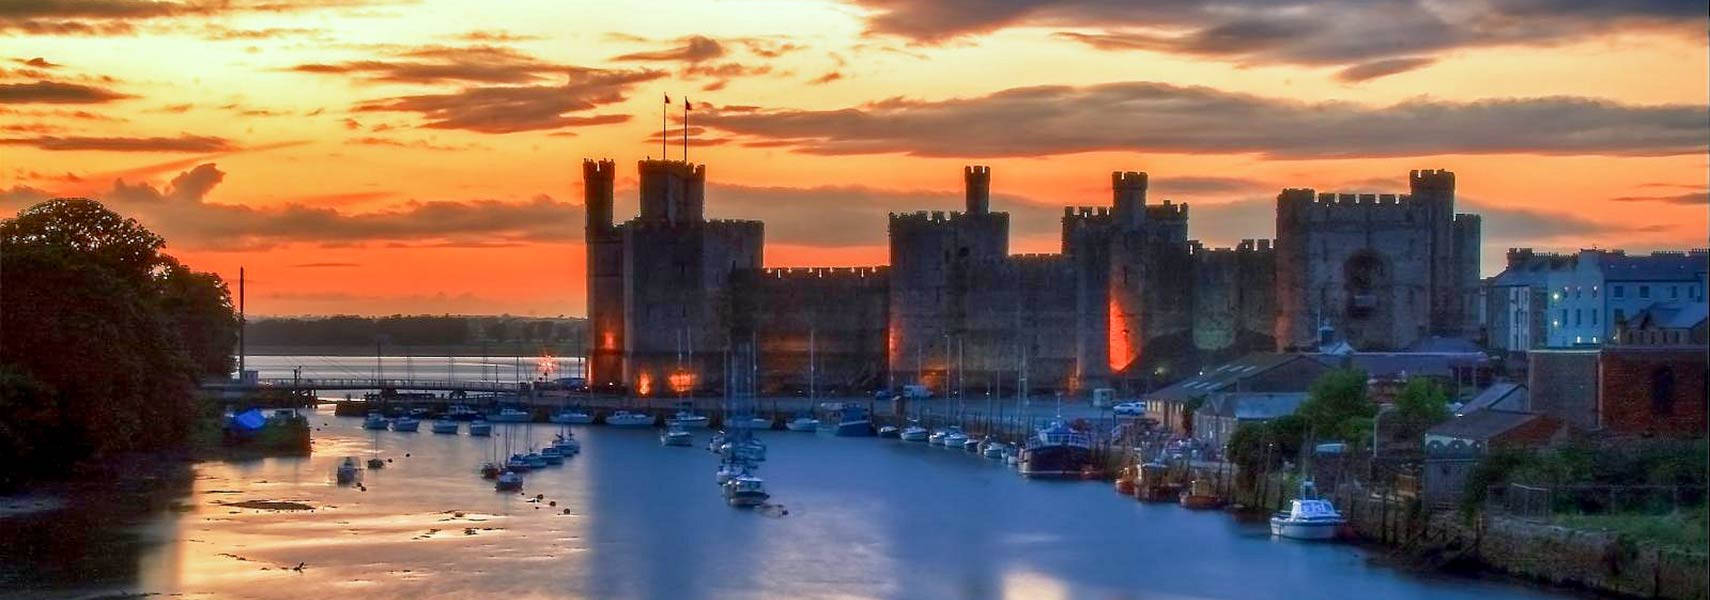 a castle with boats on the water at sunset Wallpaper